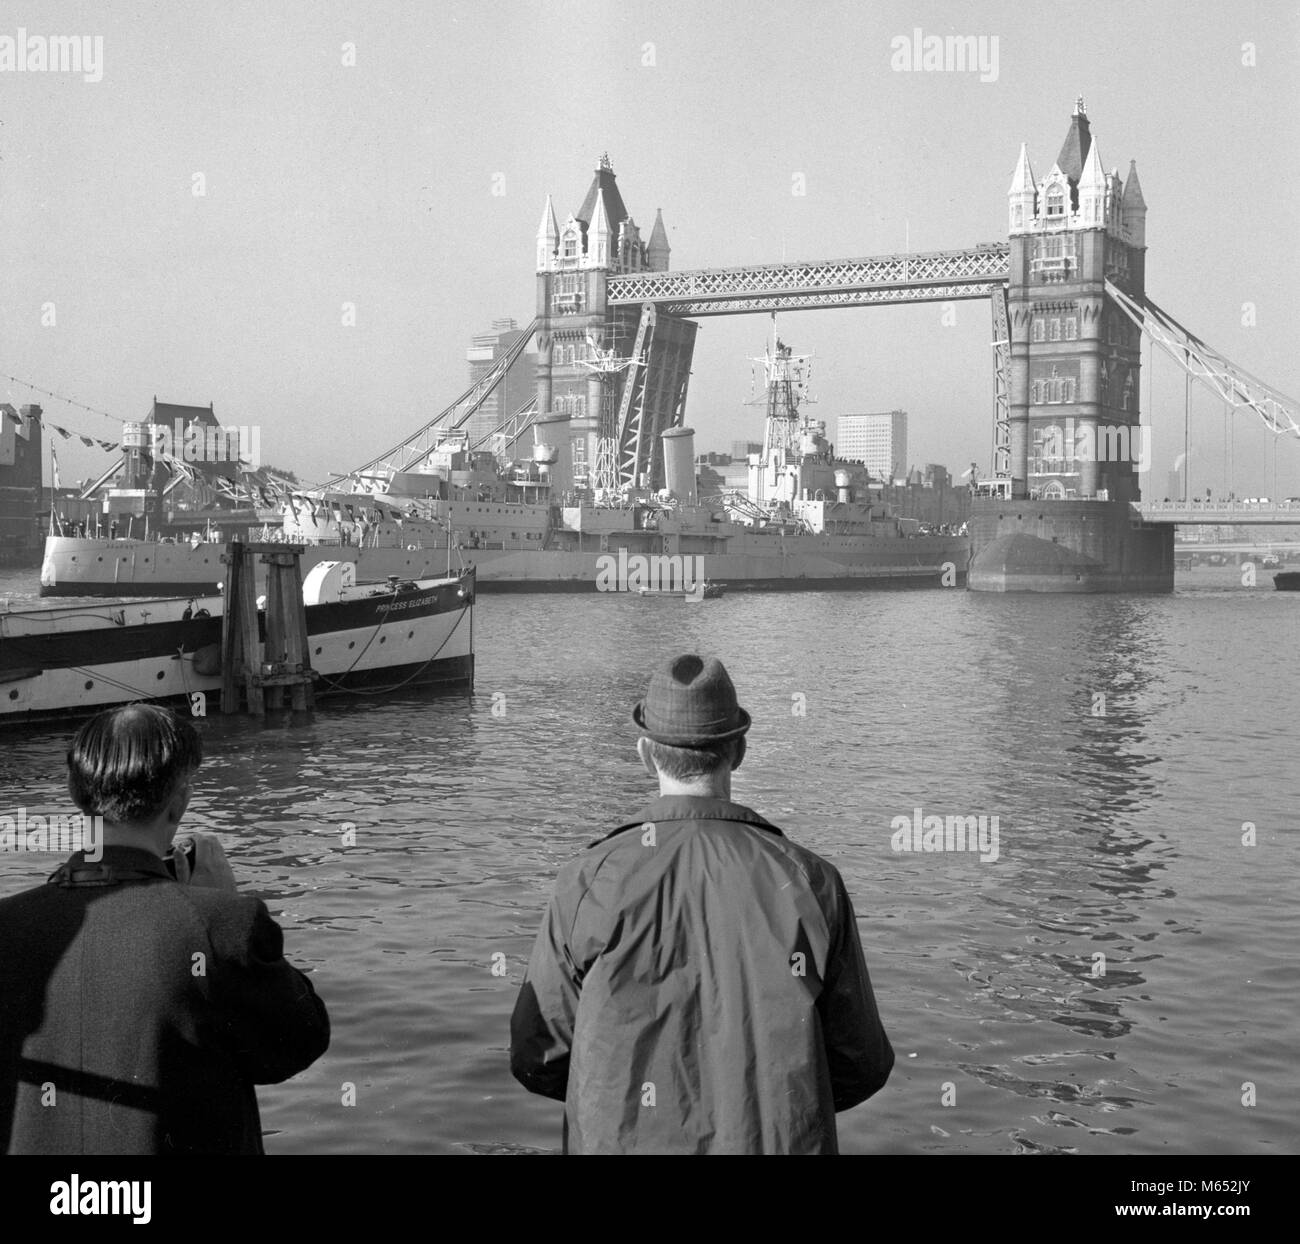 HMS Belfast, the last of the Royal Navy's big-gun cruisers, passing through Tower Bridge on her way from the King George V Dock at Greenwich to her final mooring close to Tower Bridge, where she will become a floating museum. Stock Photo